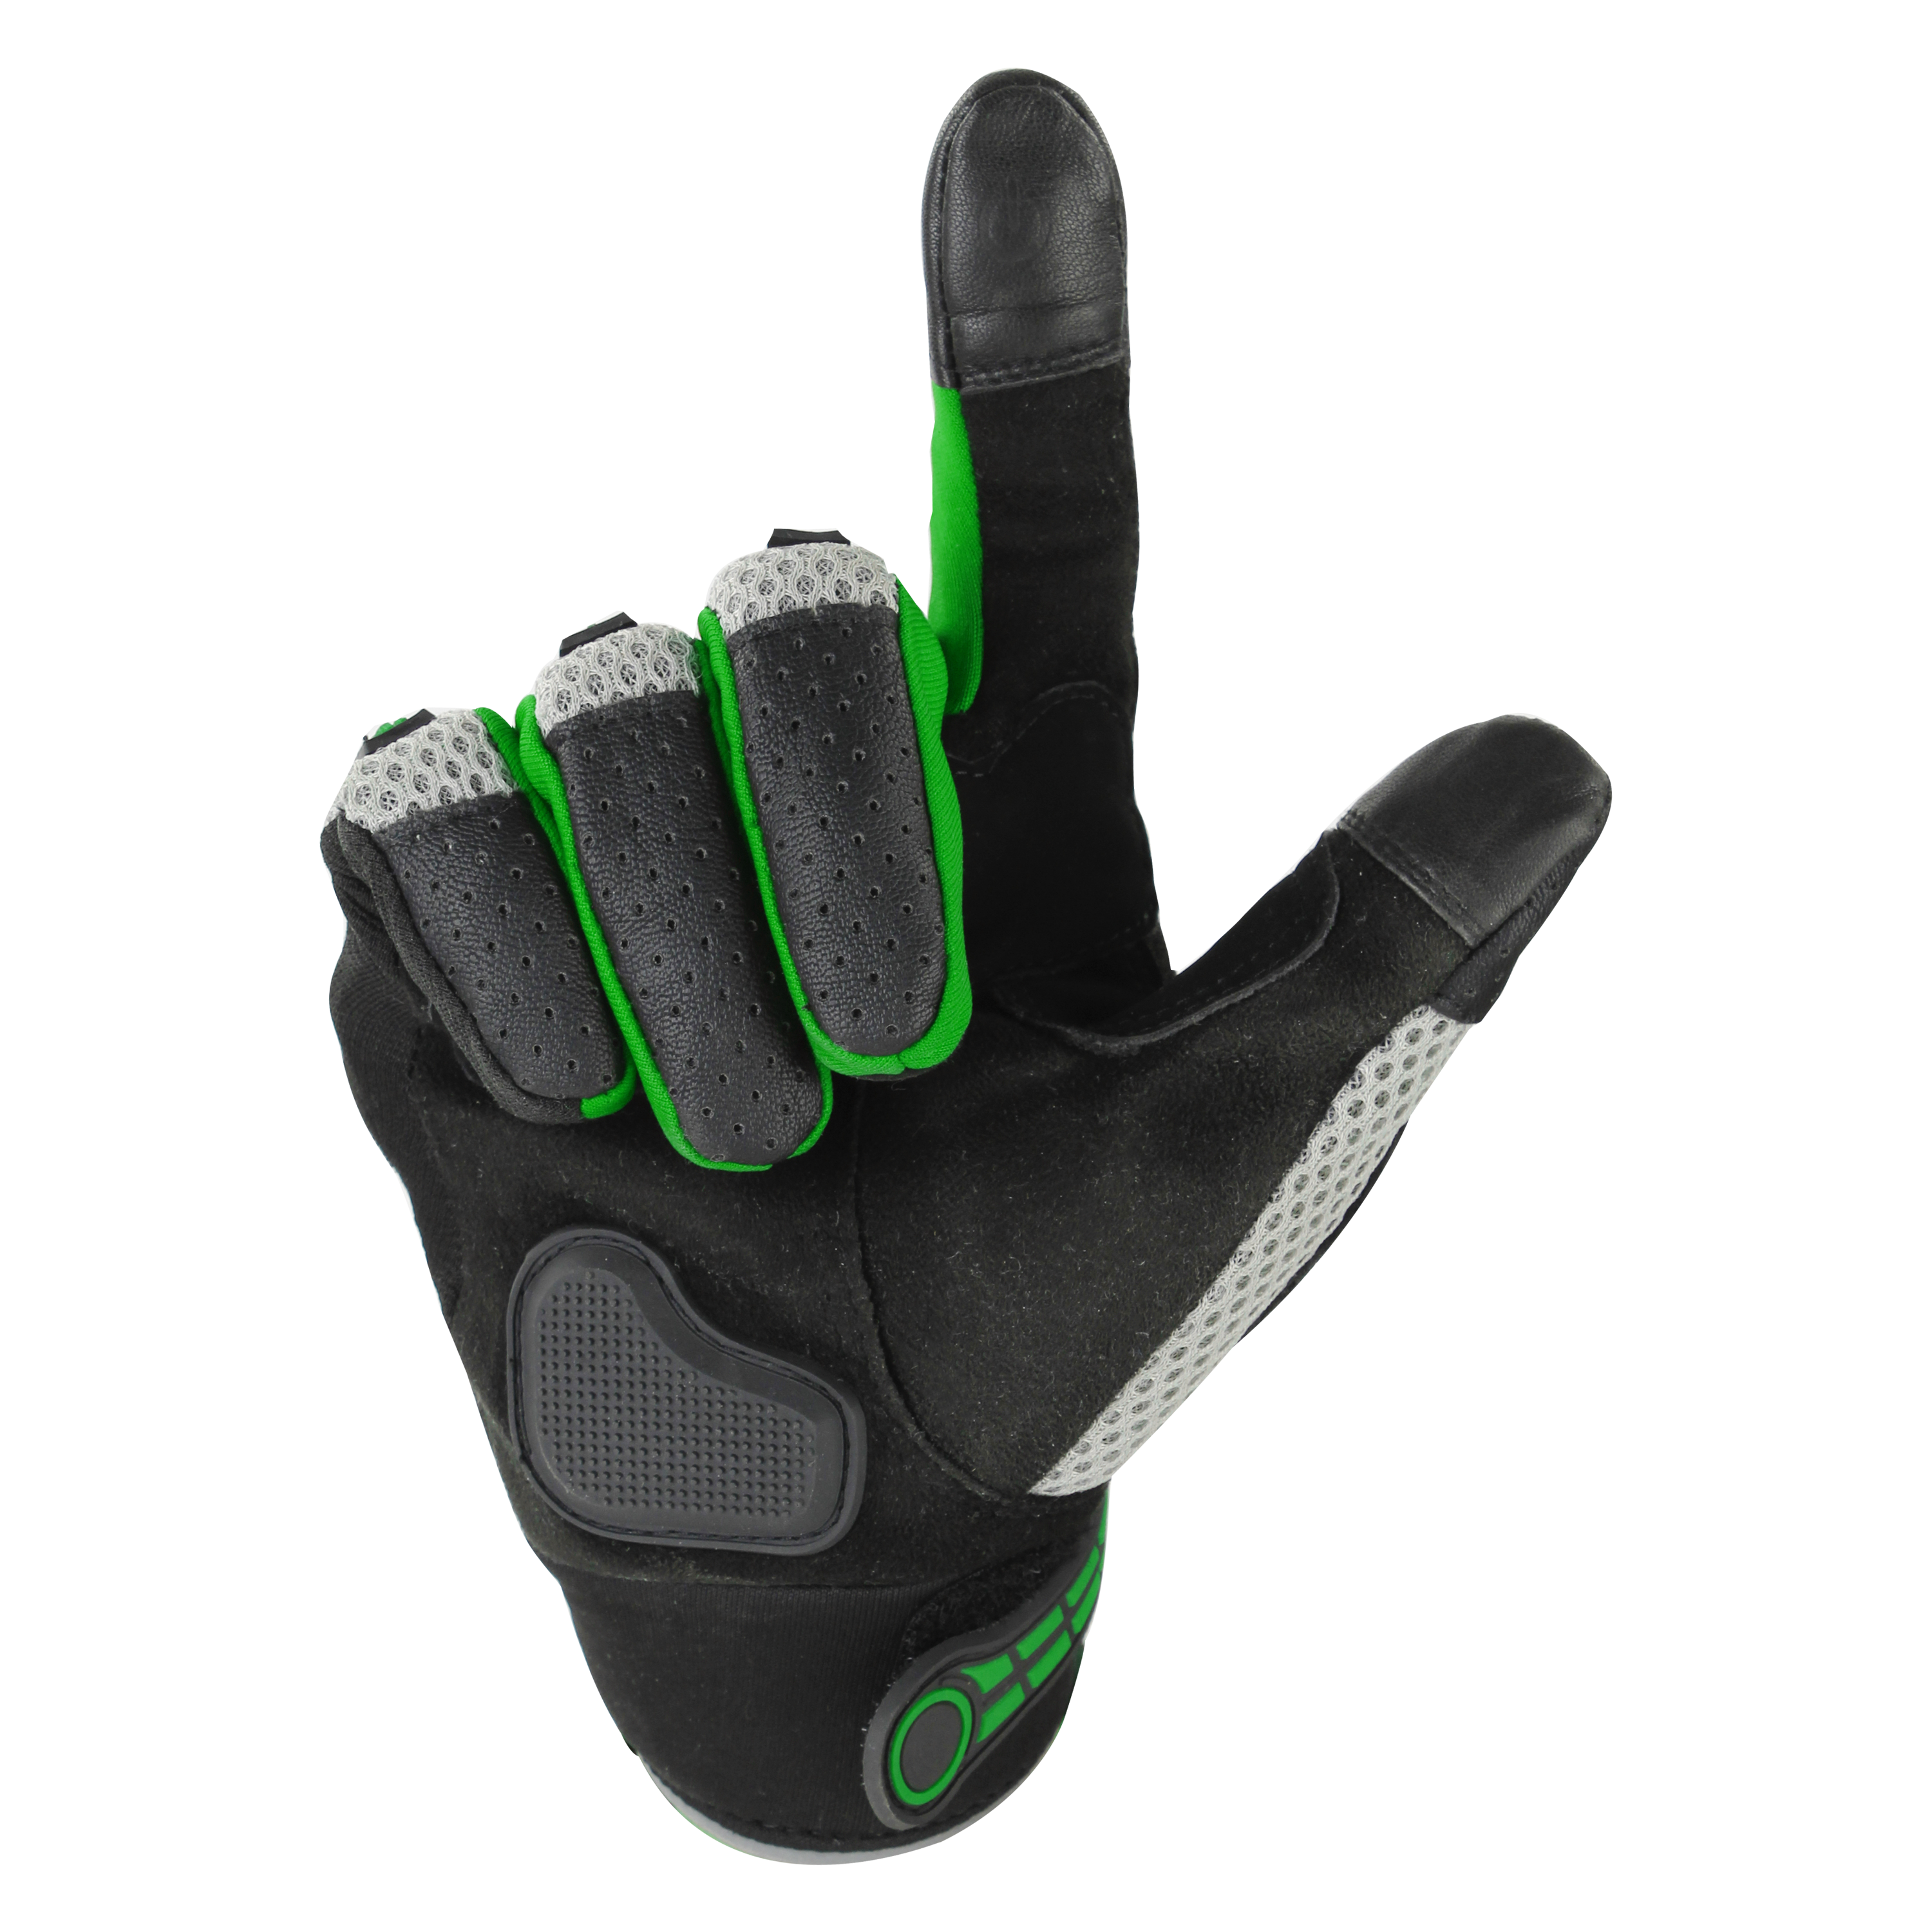 Steelbird Adventure A-1 Full Finger Riding Gloves With Touch Screen Sensitivity At Thumb & Index Finger, Protective Off-Road Motorbike Racing (Green)